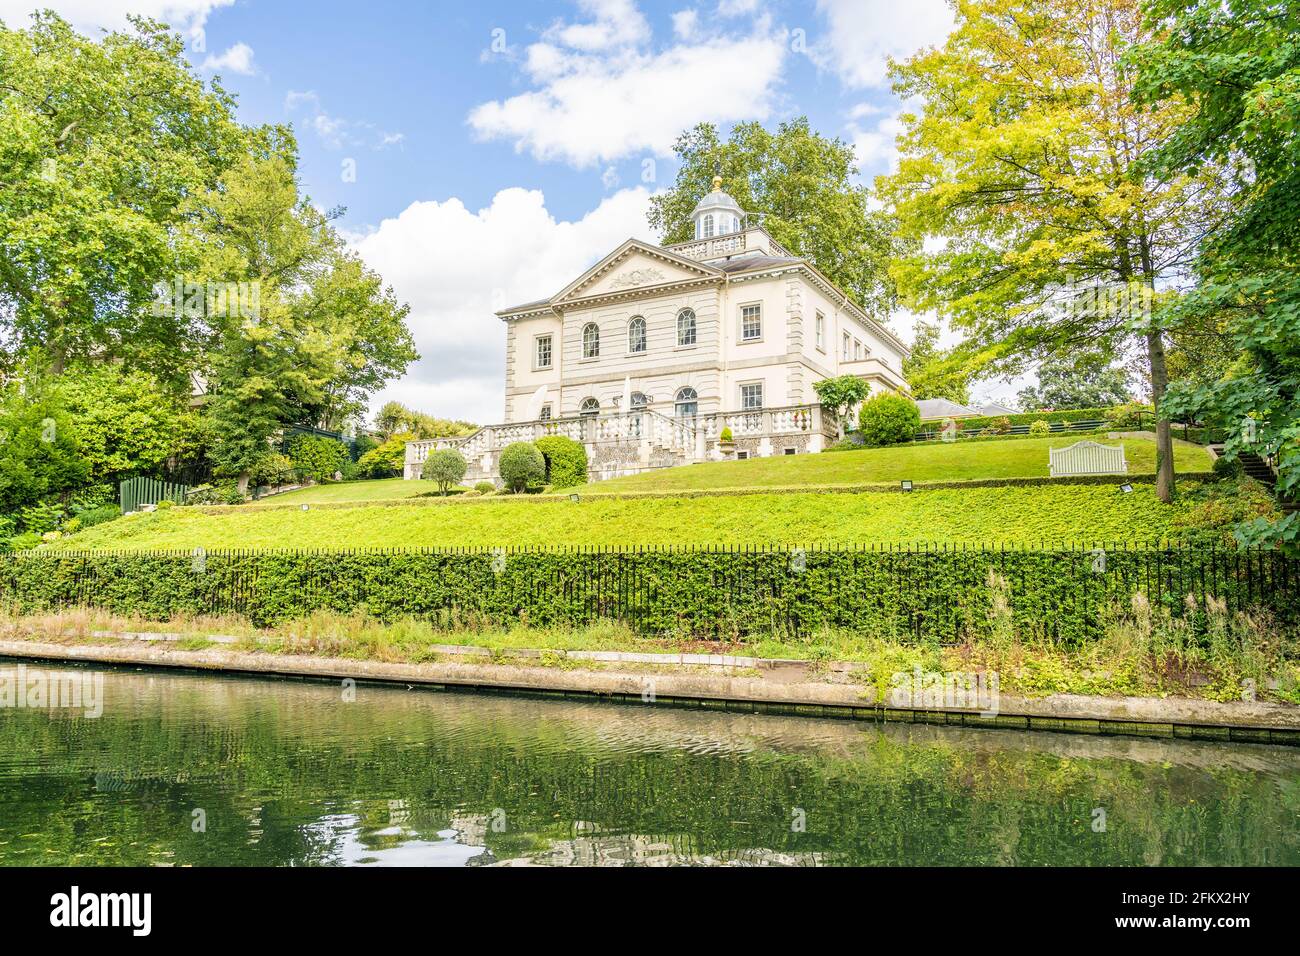 July 2020. London. A villa and the Regents Canal in St Johns Wood, London, England Stock Photo